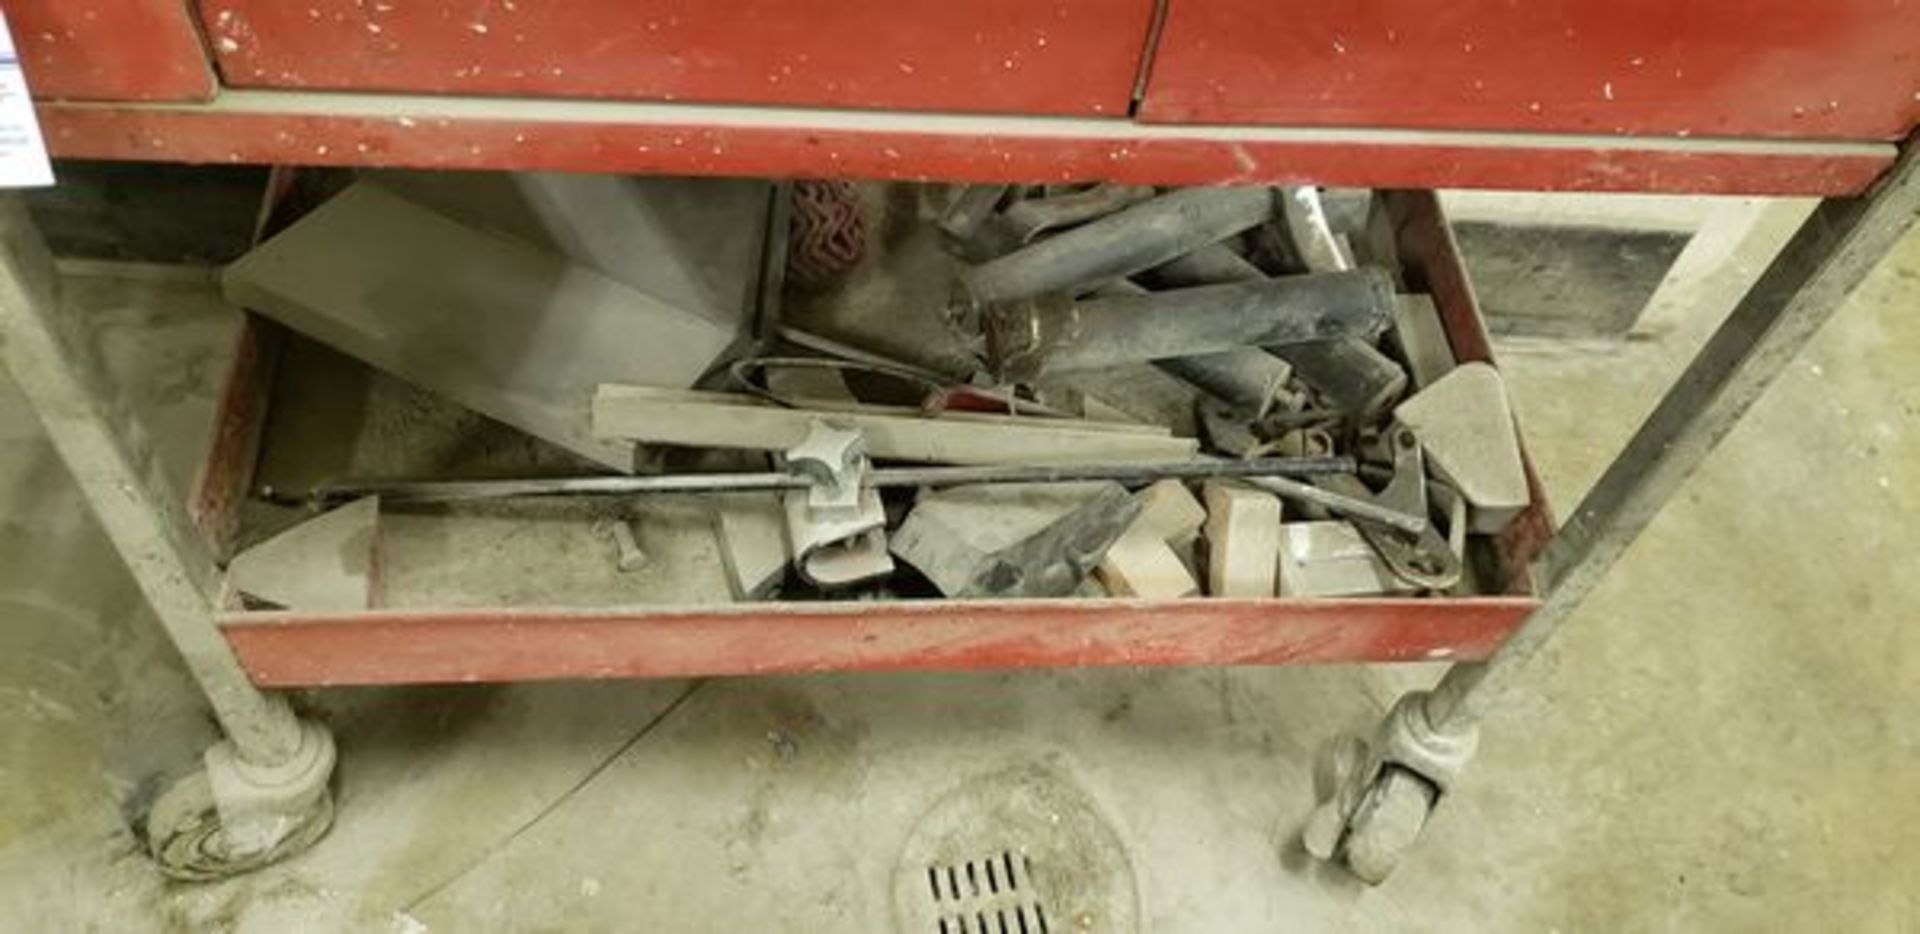 SNAP ON TOOL CART WITH CONTENT ON BOTTOM SHELF - Image 3 of 3